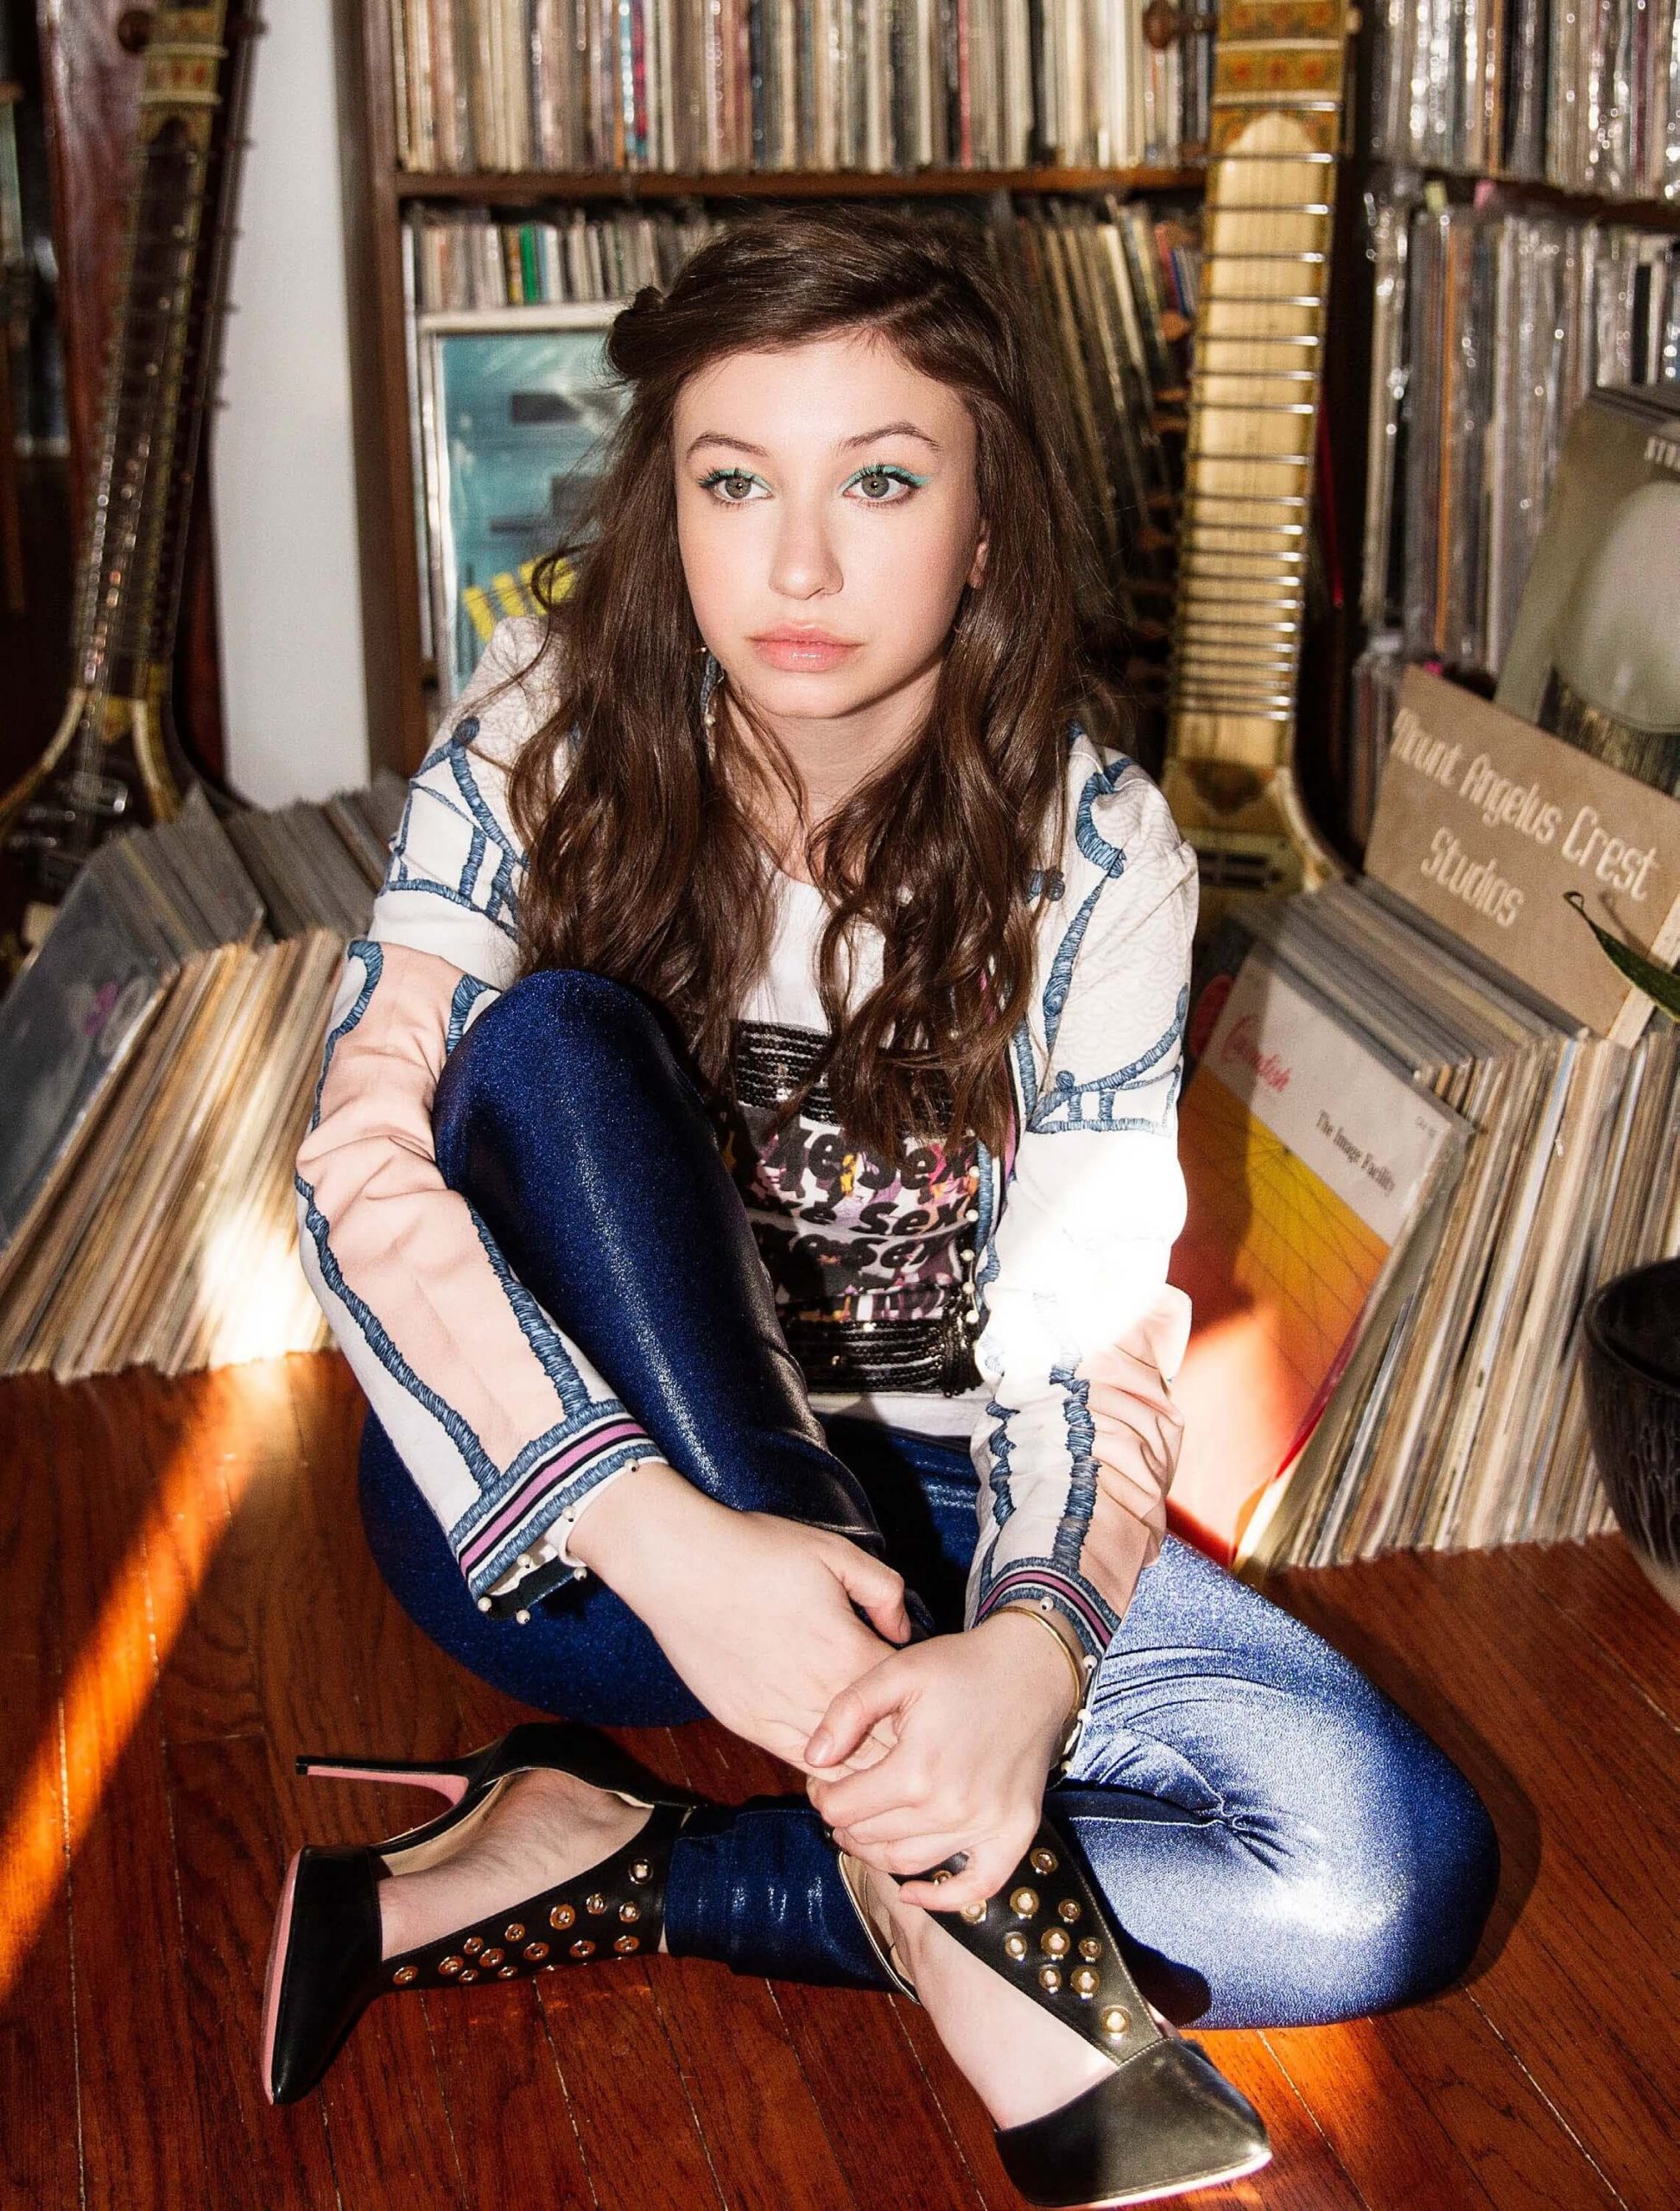 50 Katelyn Nacon Nude Pictures Which Prove Beauty Beyond Recognition 73